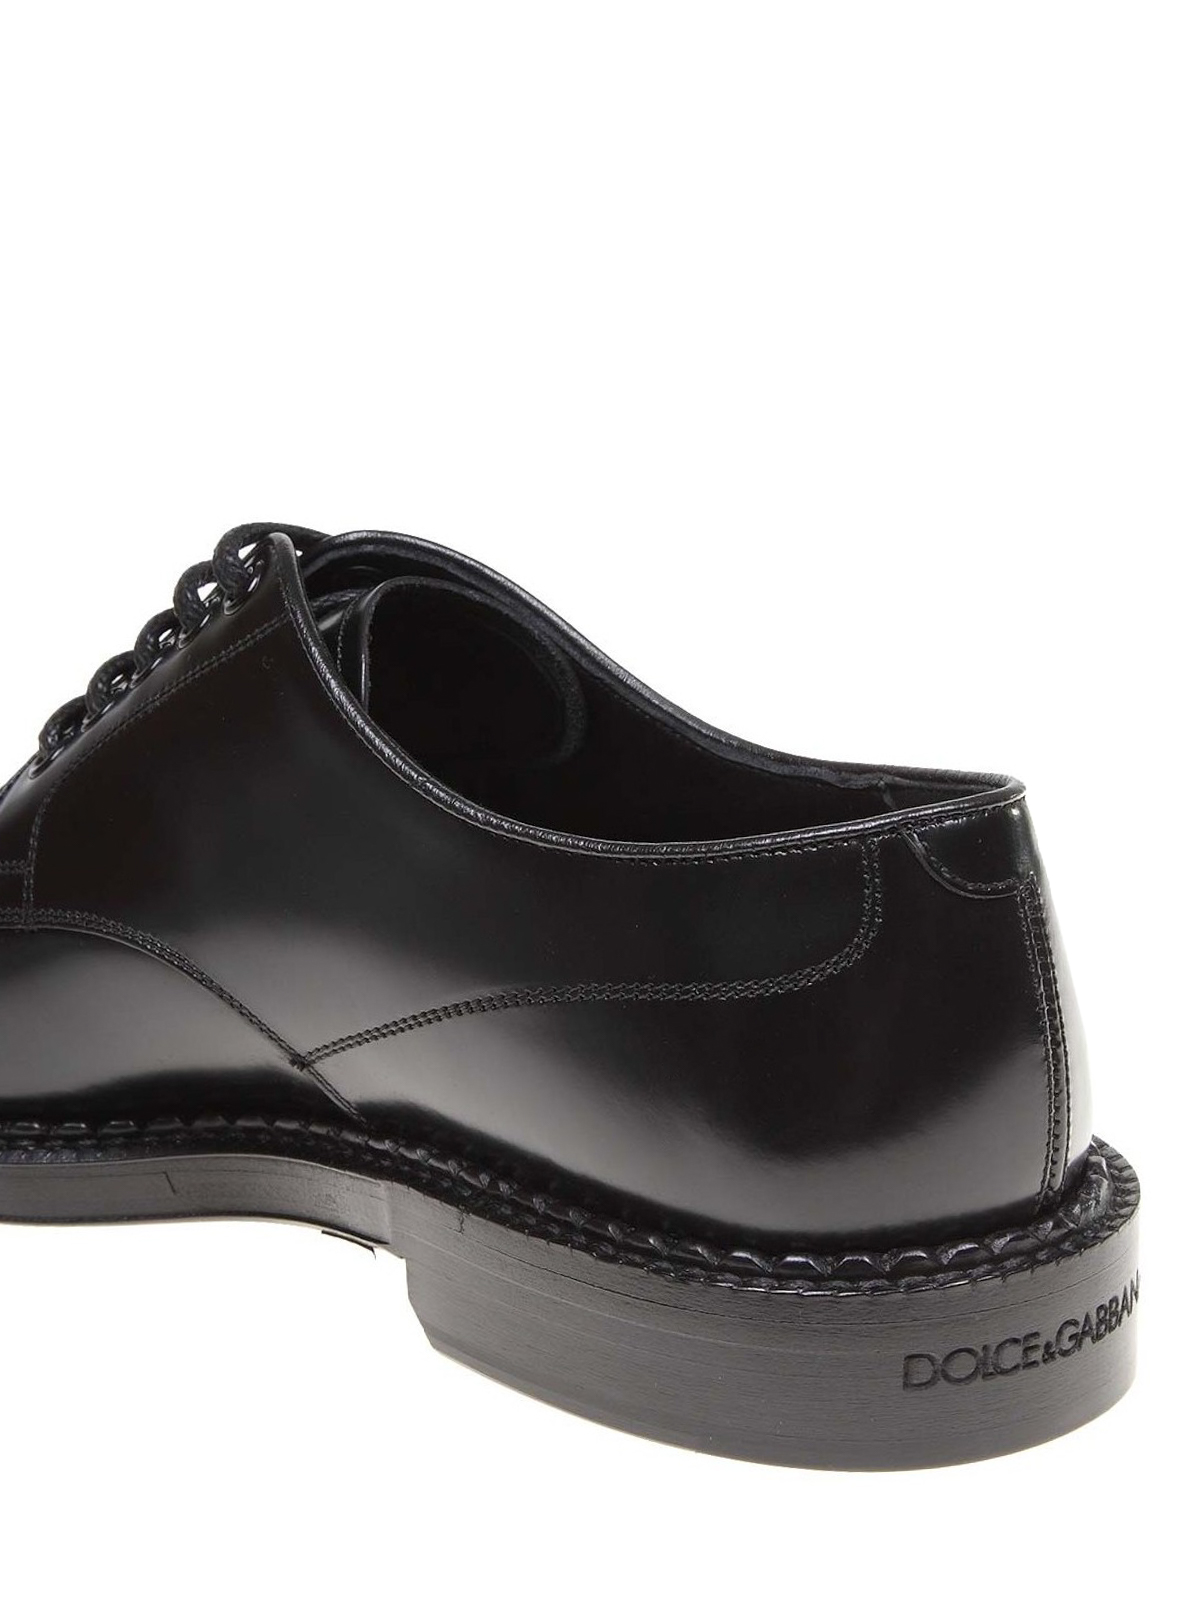 Mens Shoes Lace-ups Derby shoes Dolce & Gabbana Brushed Leather Derby Shoes in Black for Men 